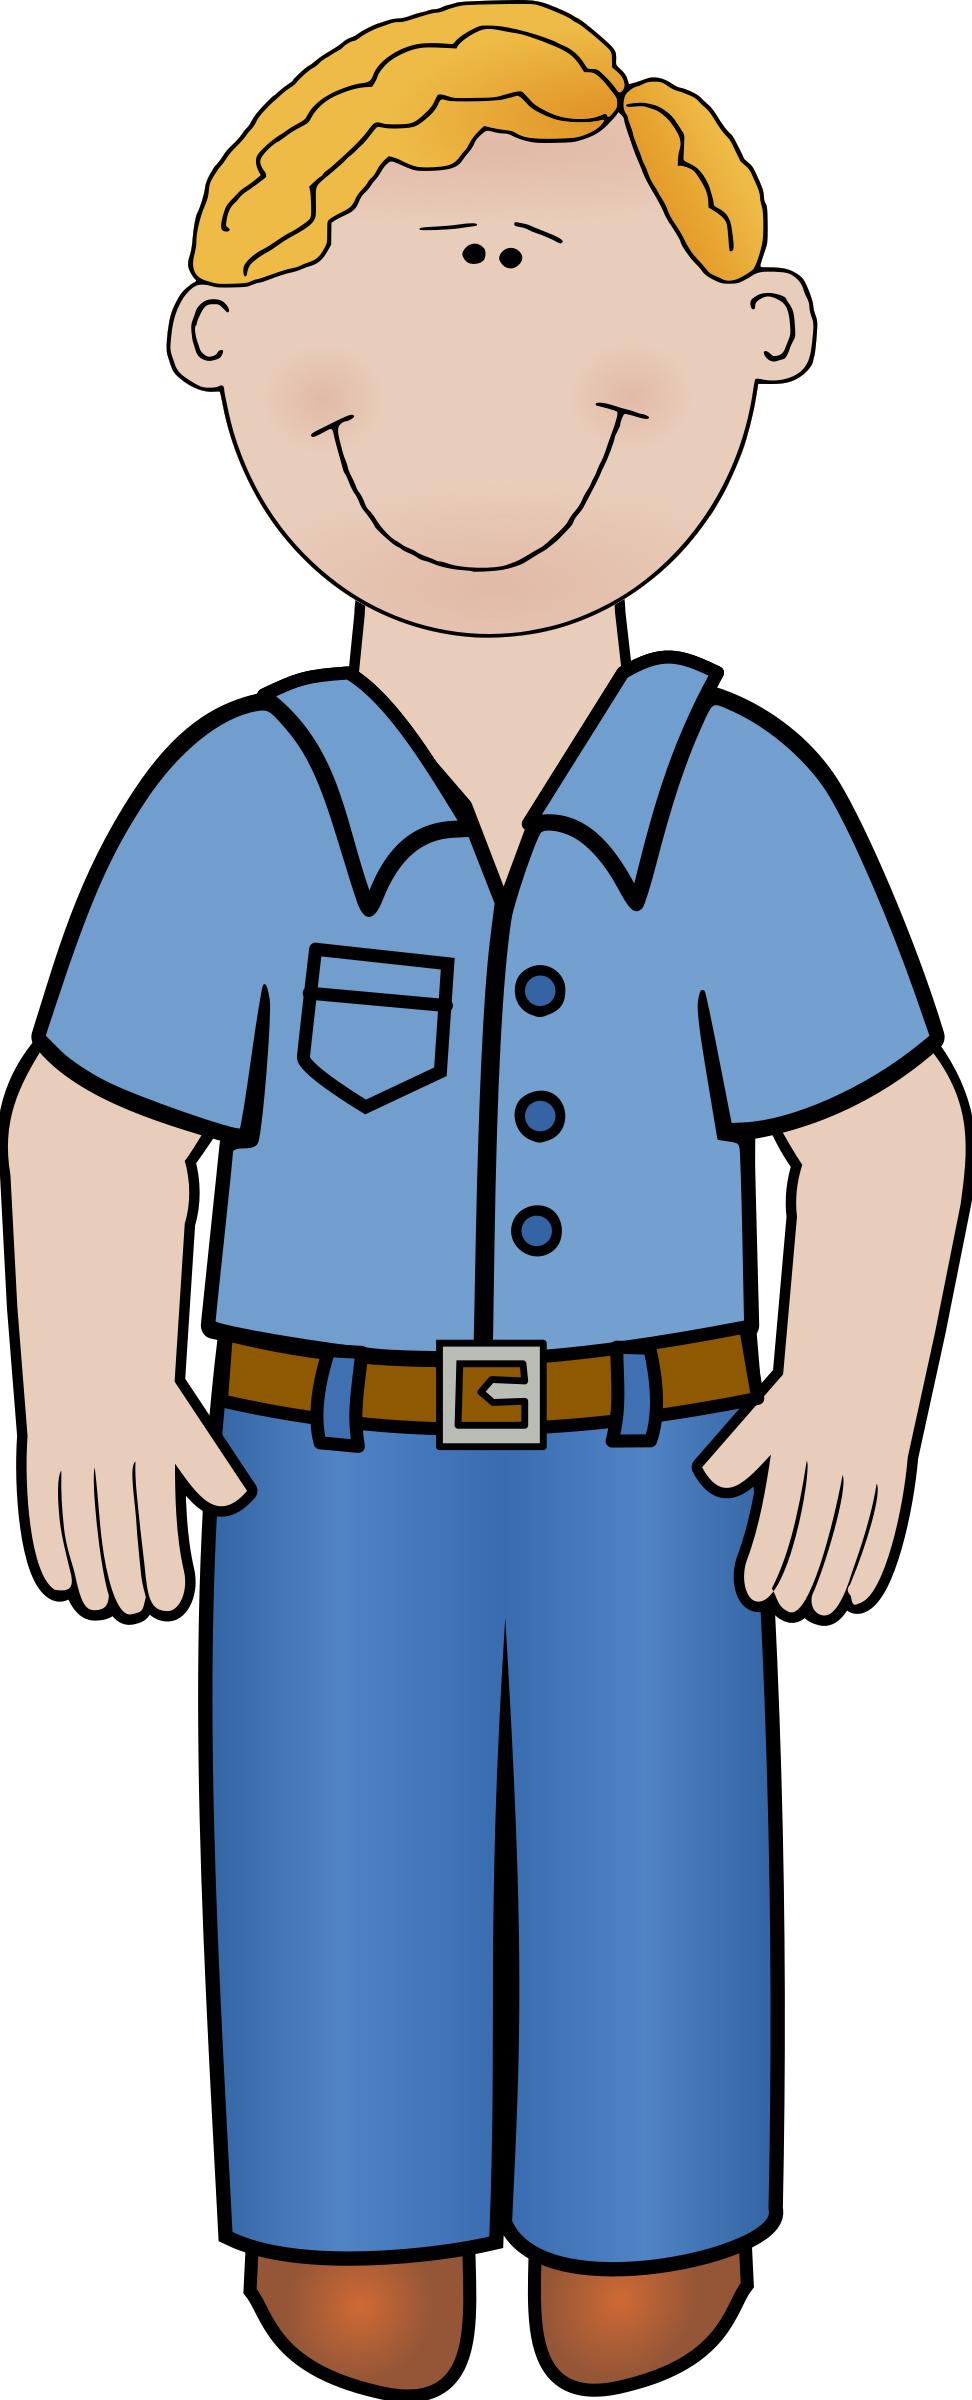 daddy standing 01 png